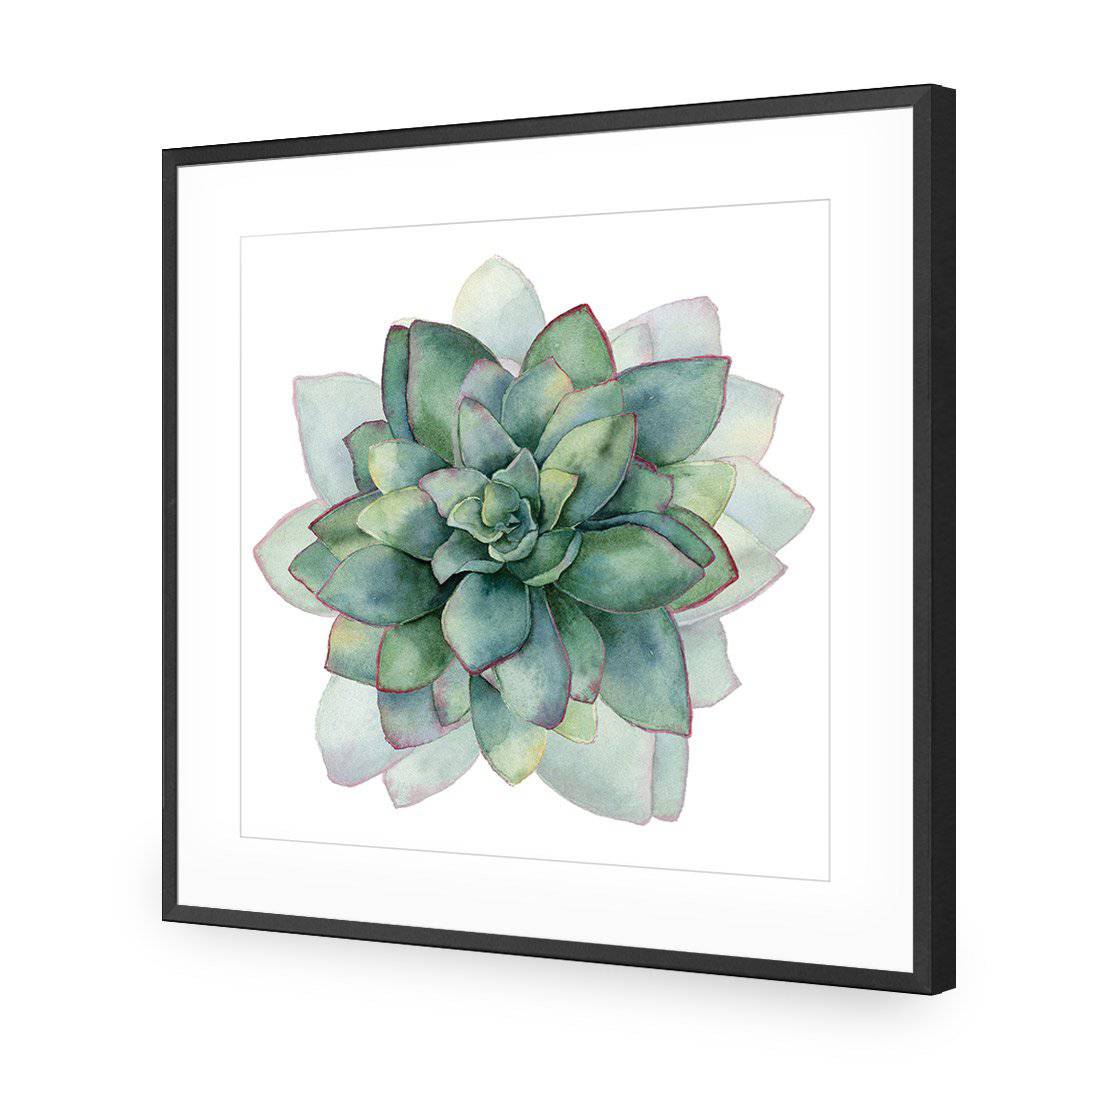 Succulent Spiral, Square-Acrylic-Wall Art Design-With Border-Acrylic - Black Frame-37x37cm-Wall Art Designs